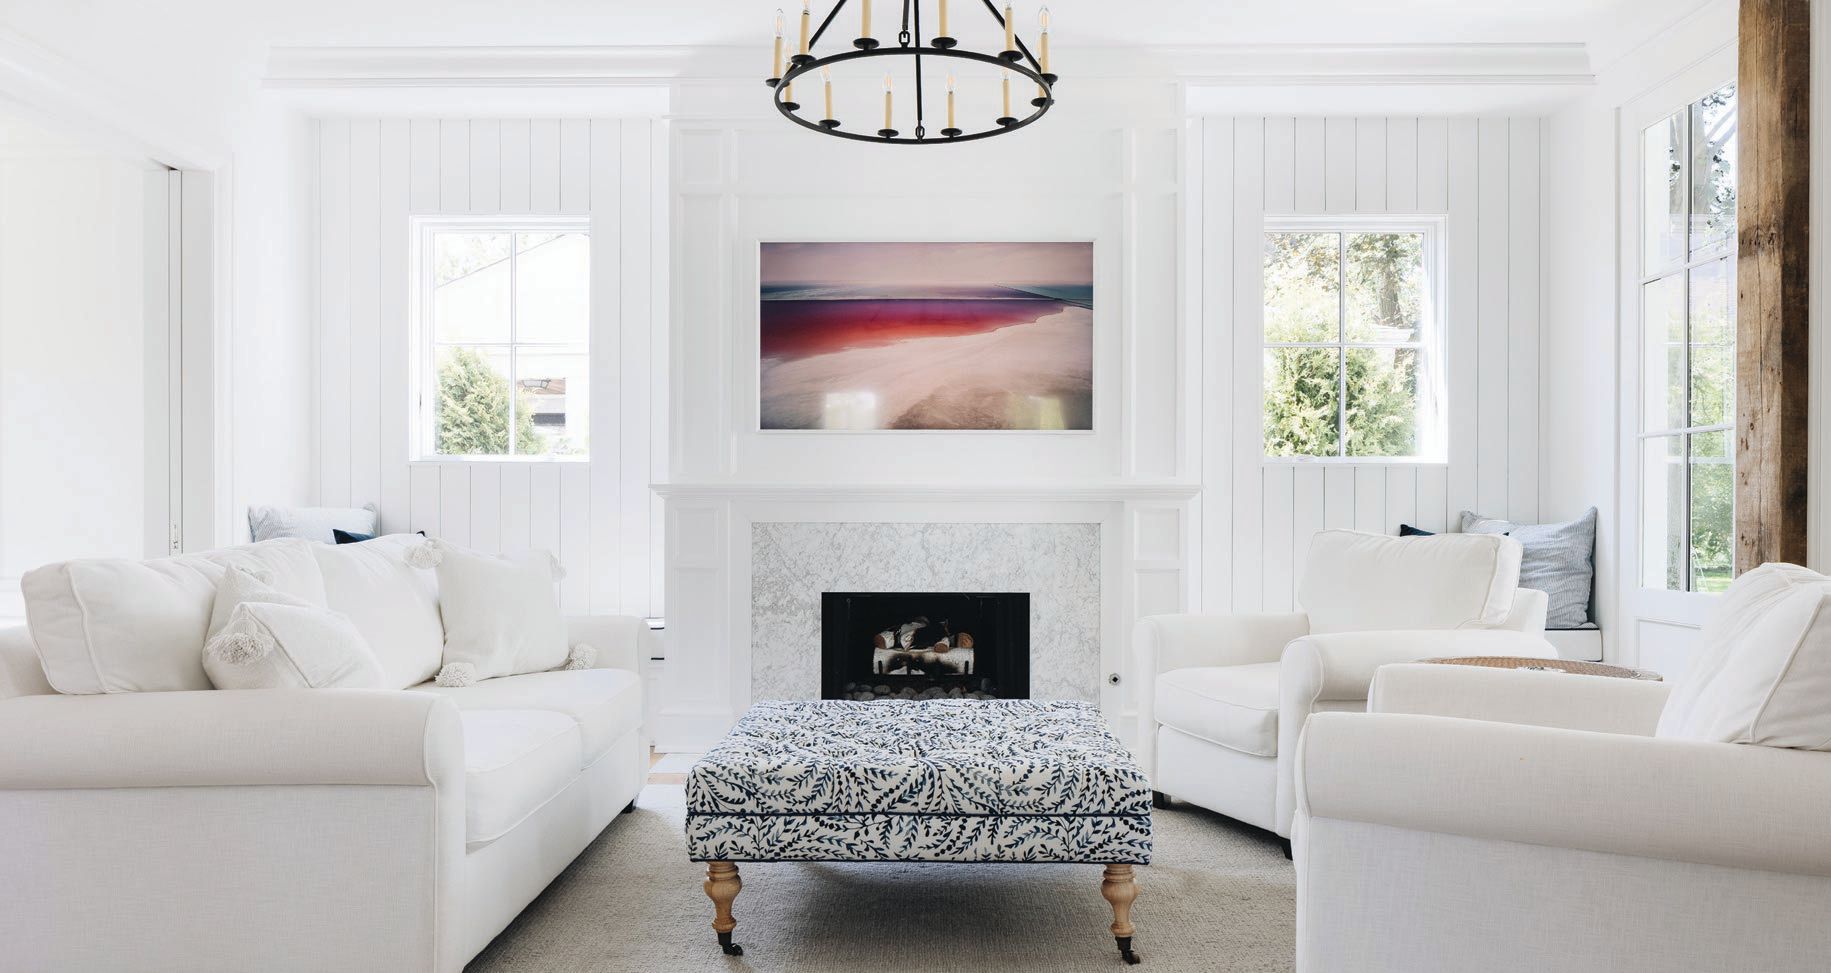 This North Shore gem by Scott Simpson Design   Build features a light, bright living area with a white marble fireplace surround, a TV that doubles as artwork, texture-rich panel molding and a dramatic focal light fixture. STOFFER PHOTOGRAPHY